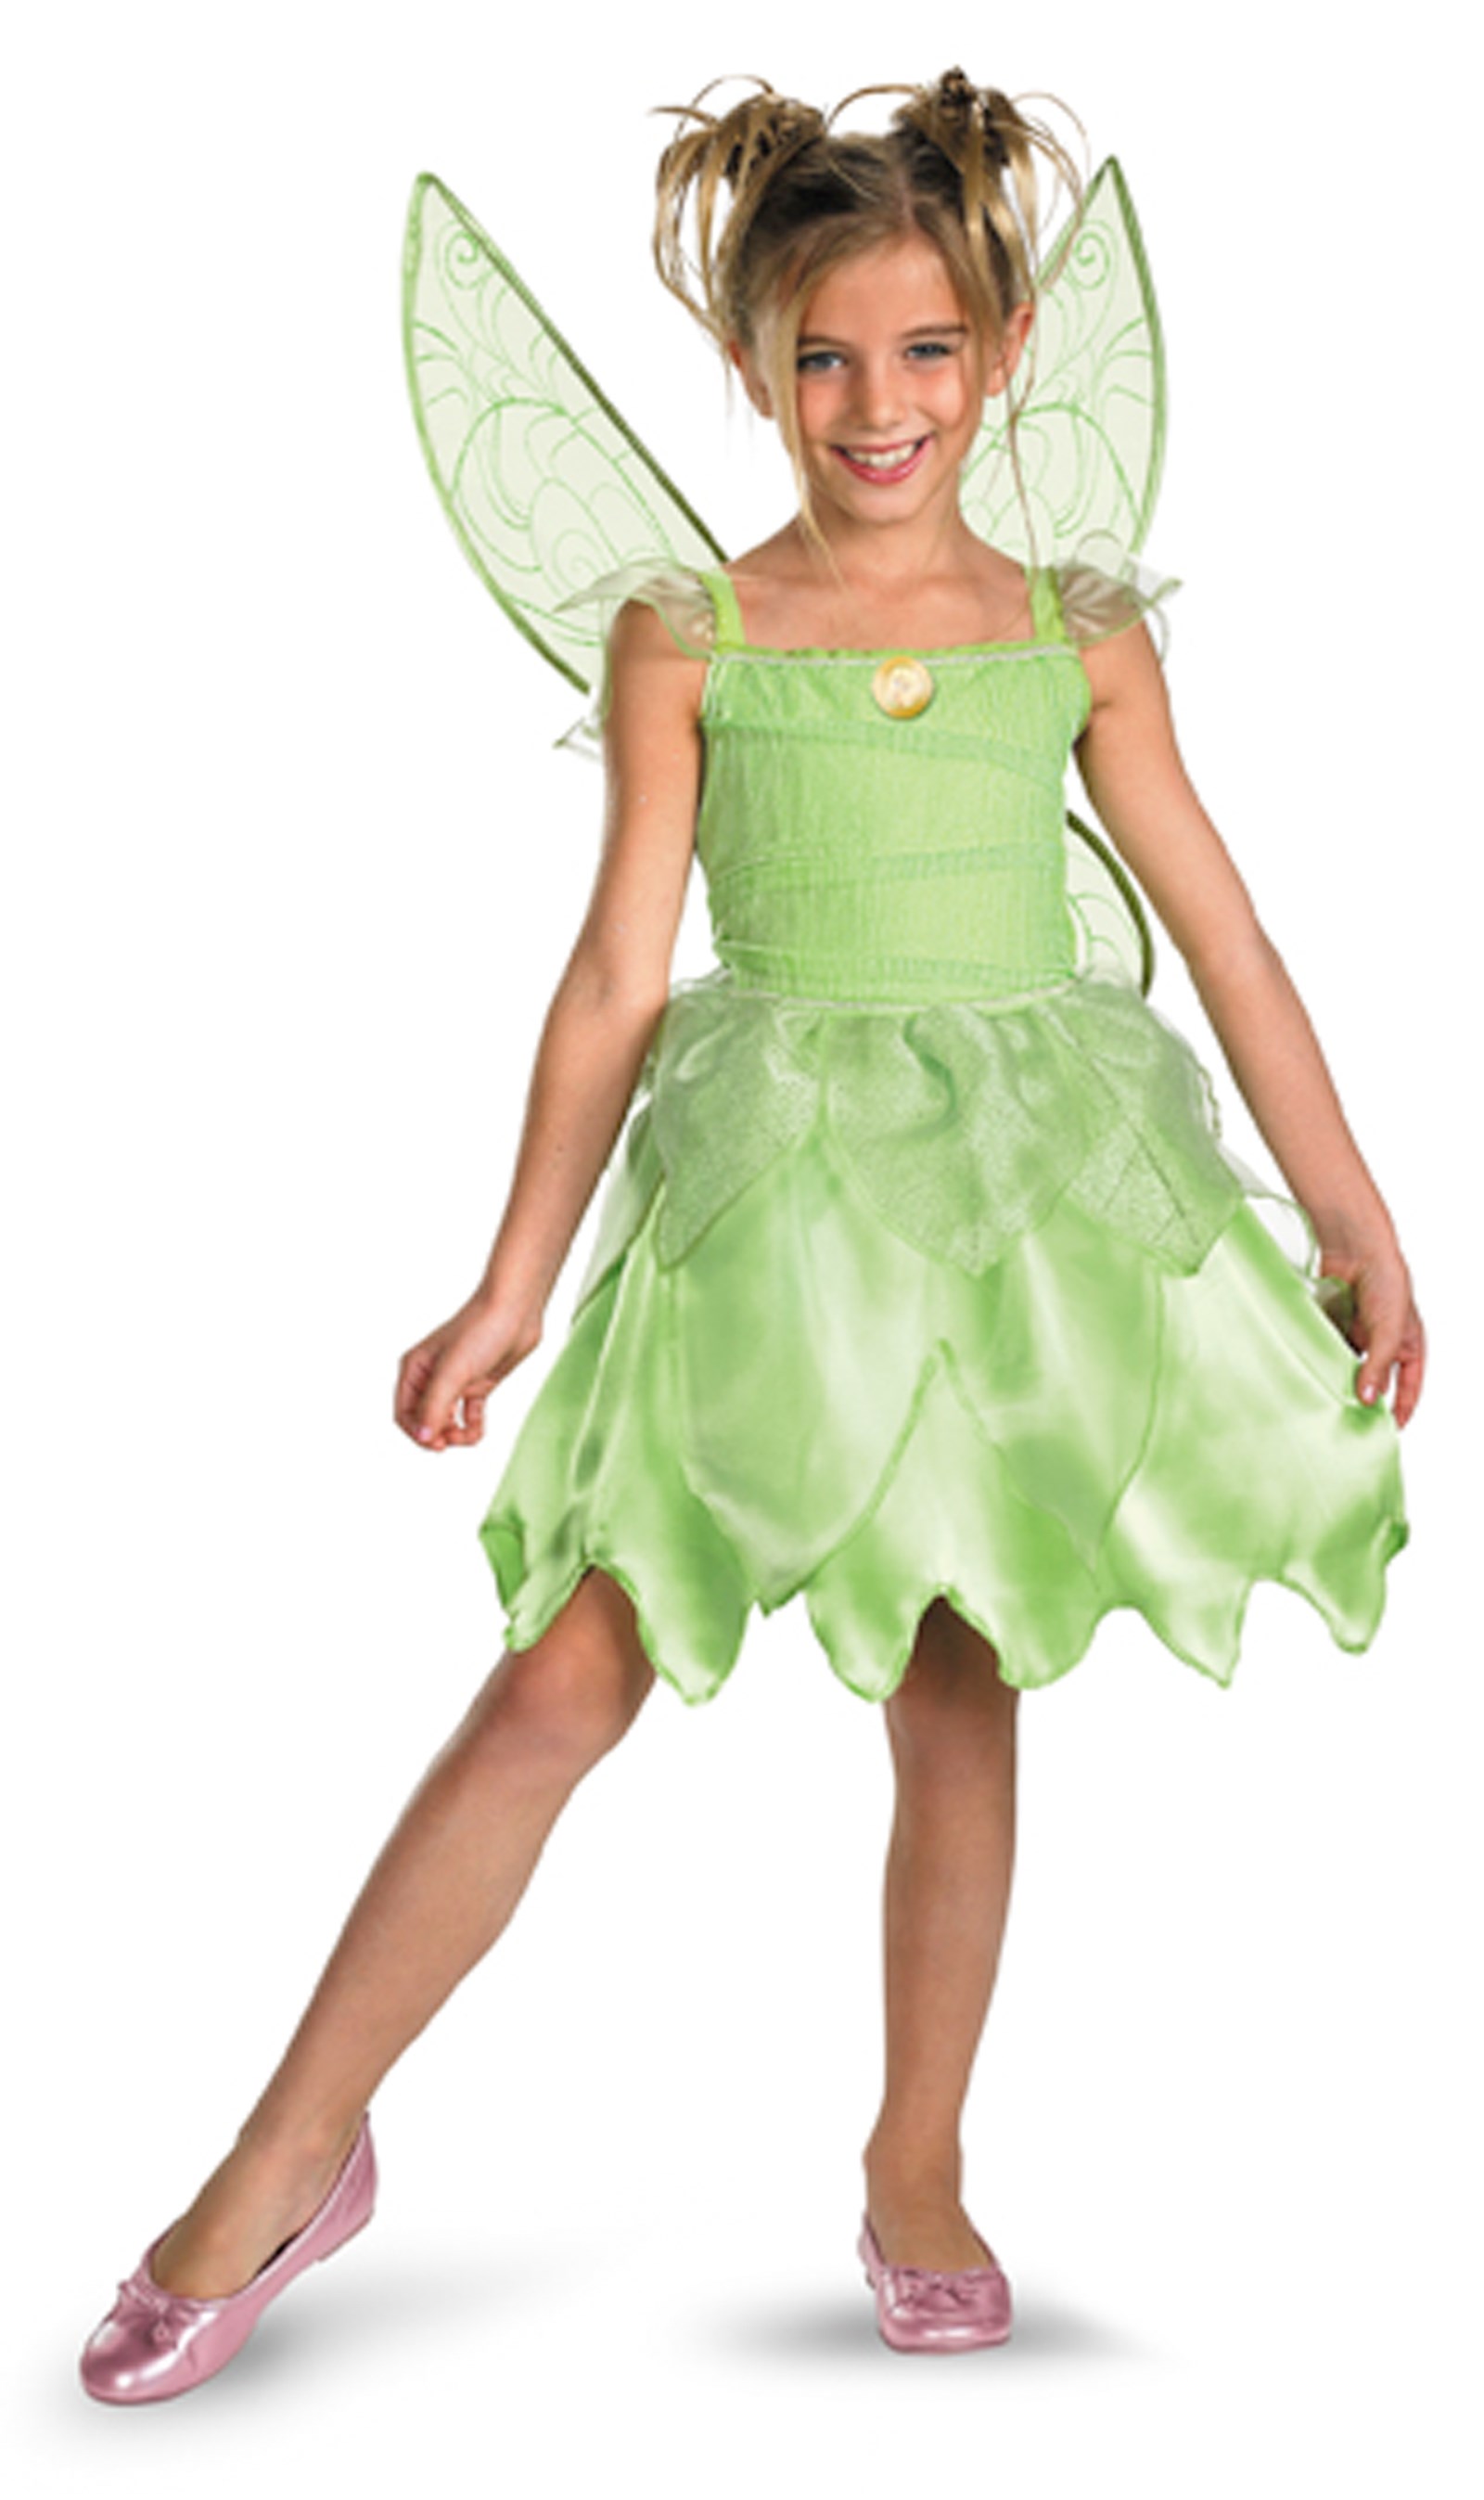 Tink and the Fairy Rescue - Tinkerbell Classic Toddler / Child Costume